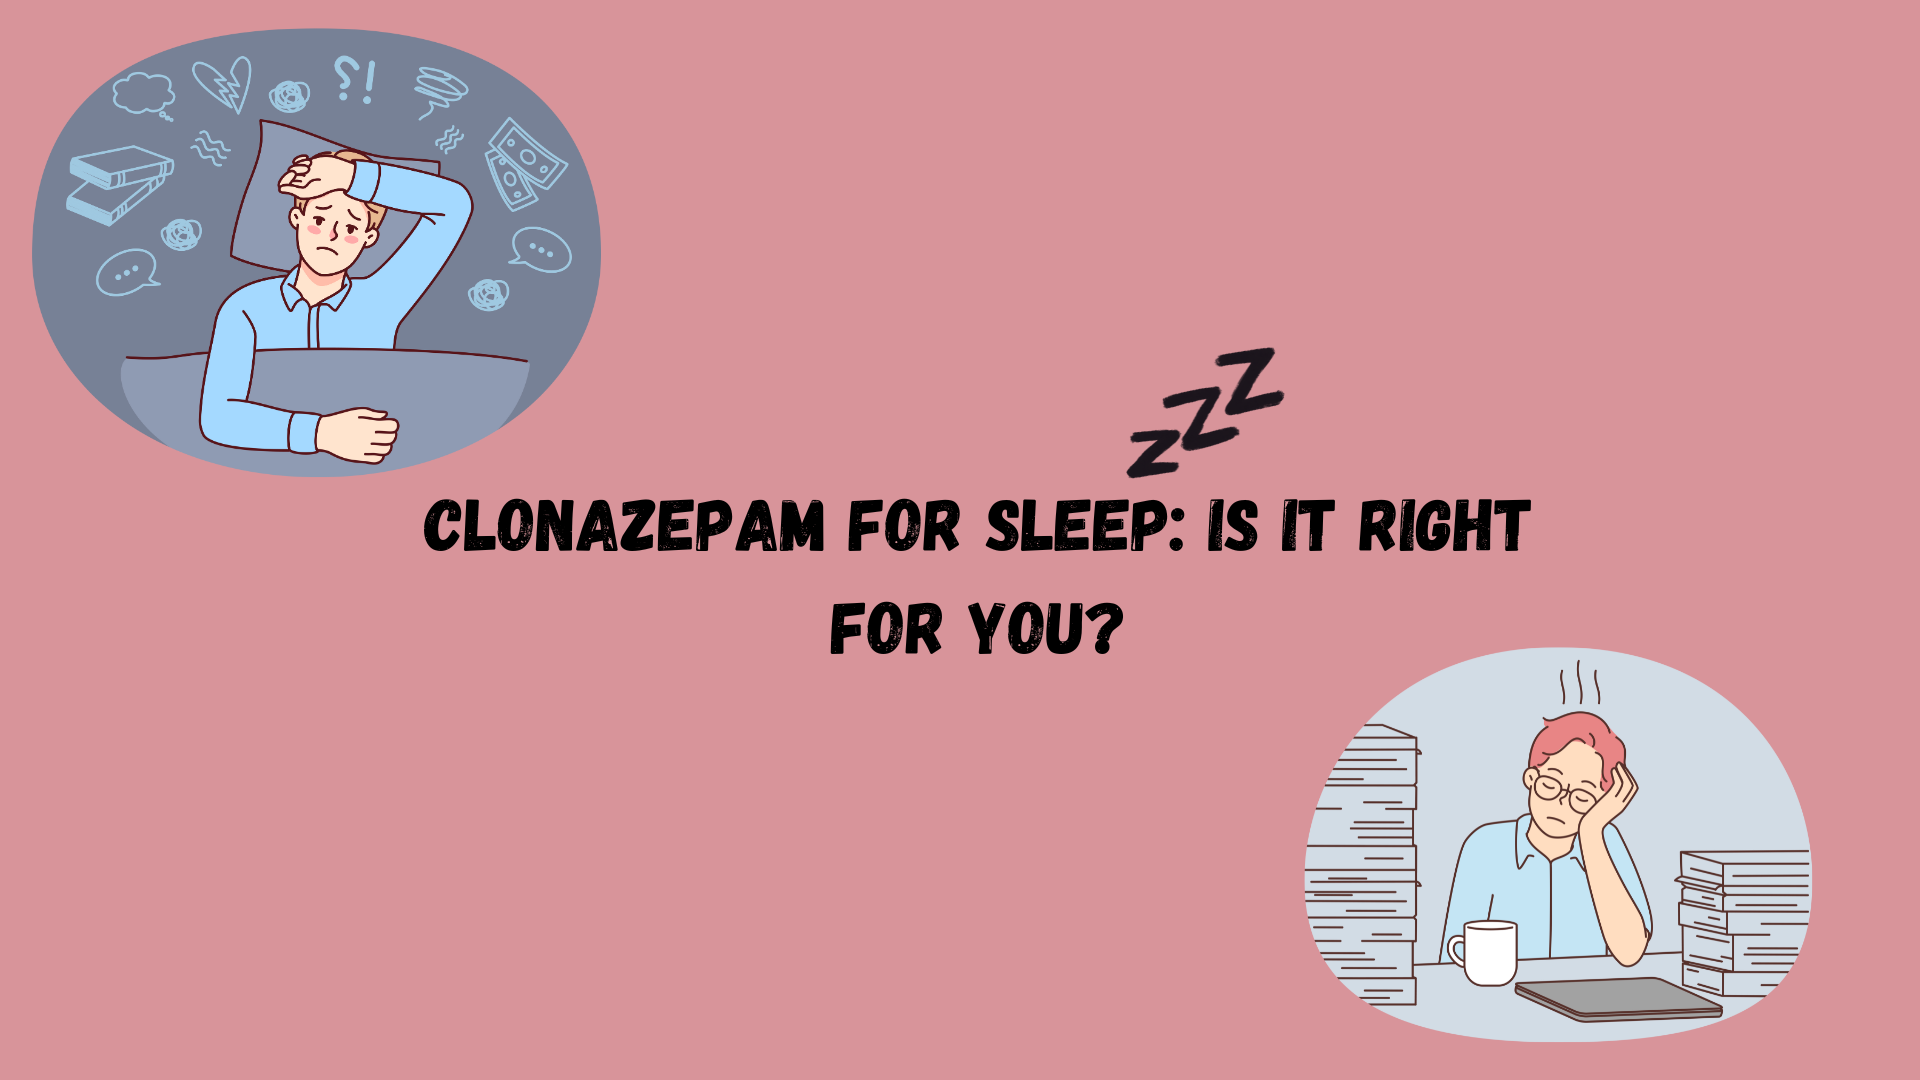 Clonazepam for Sleep: Is It Right for You?